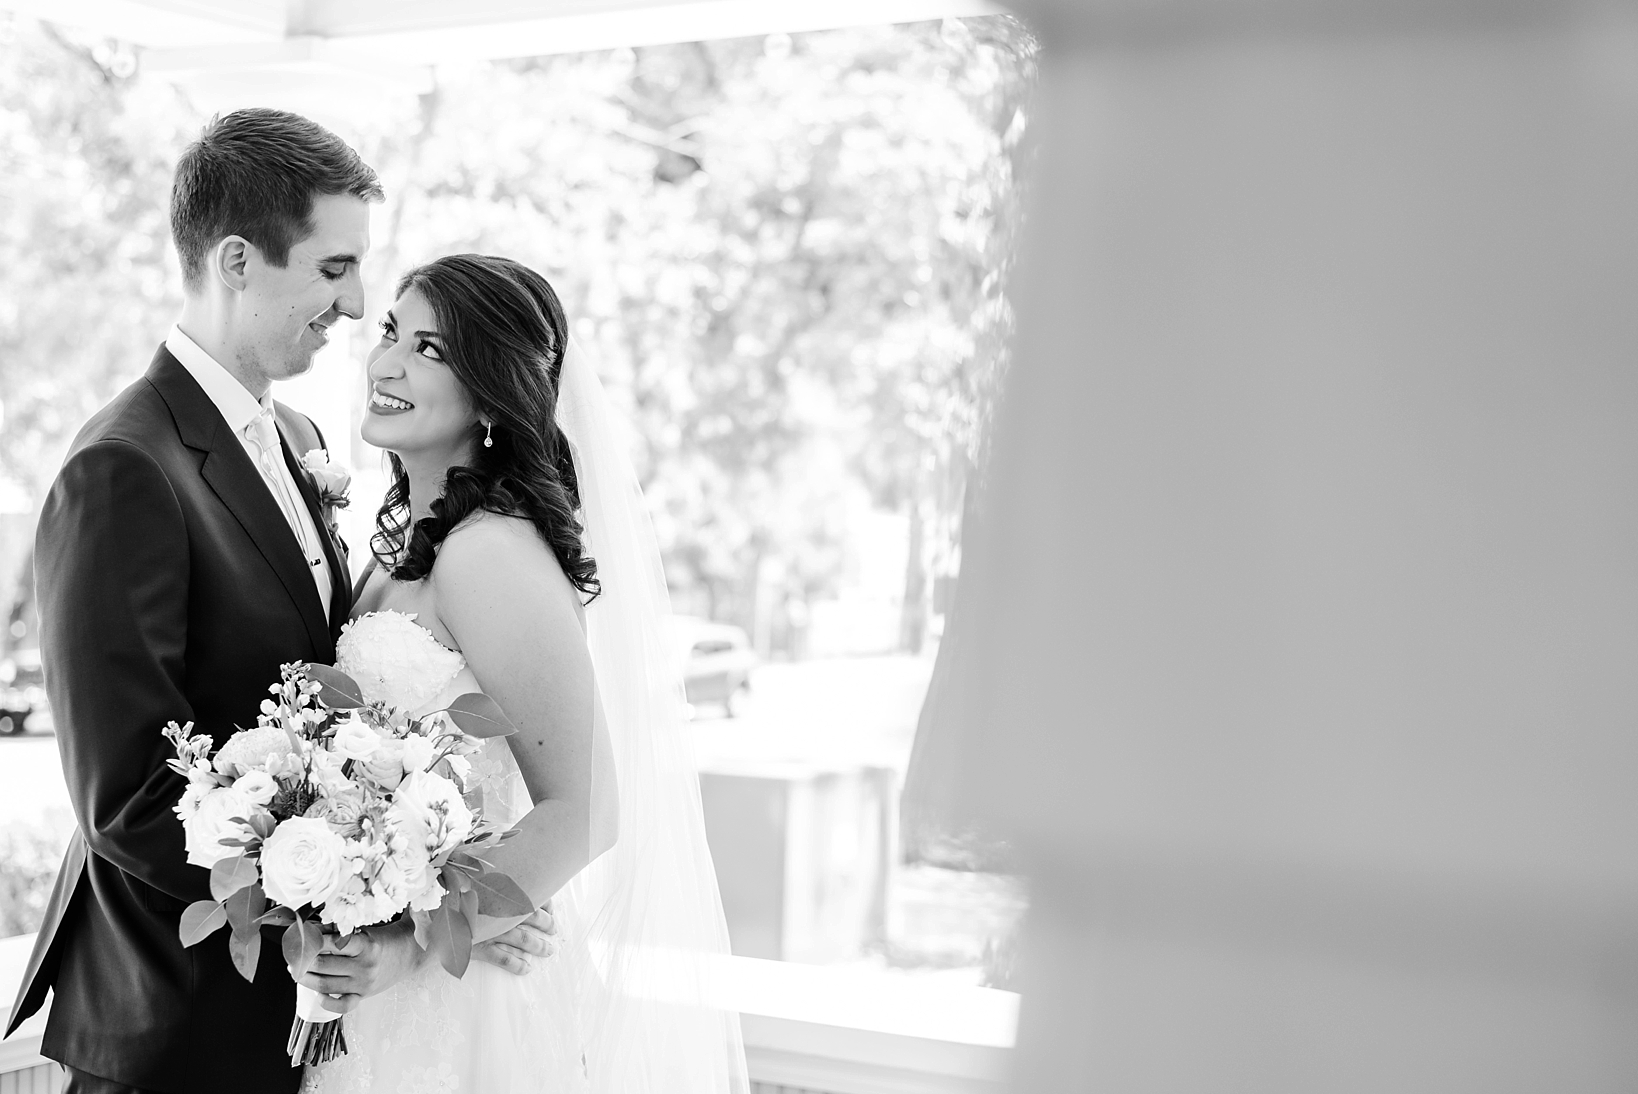 Black and White image of the Bride and Groom by Sarah & Ben Photography